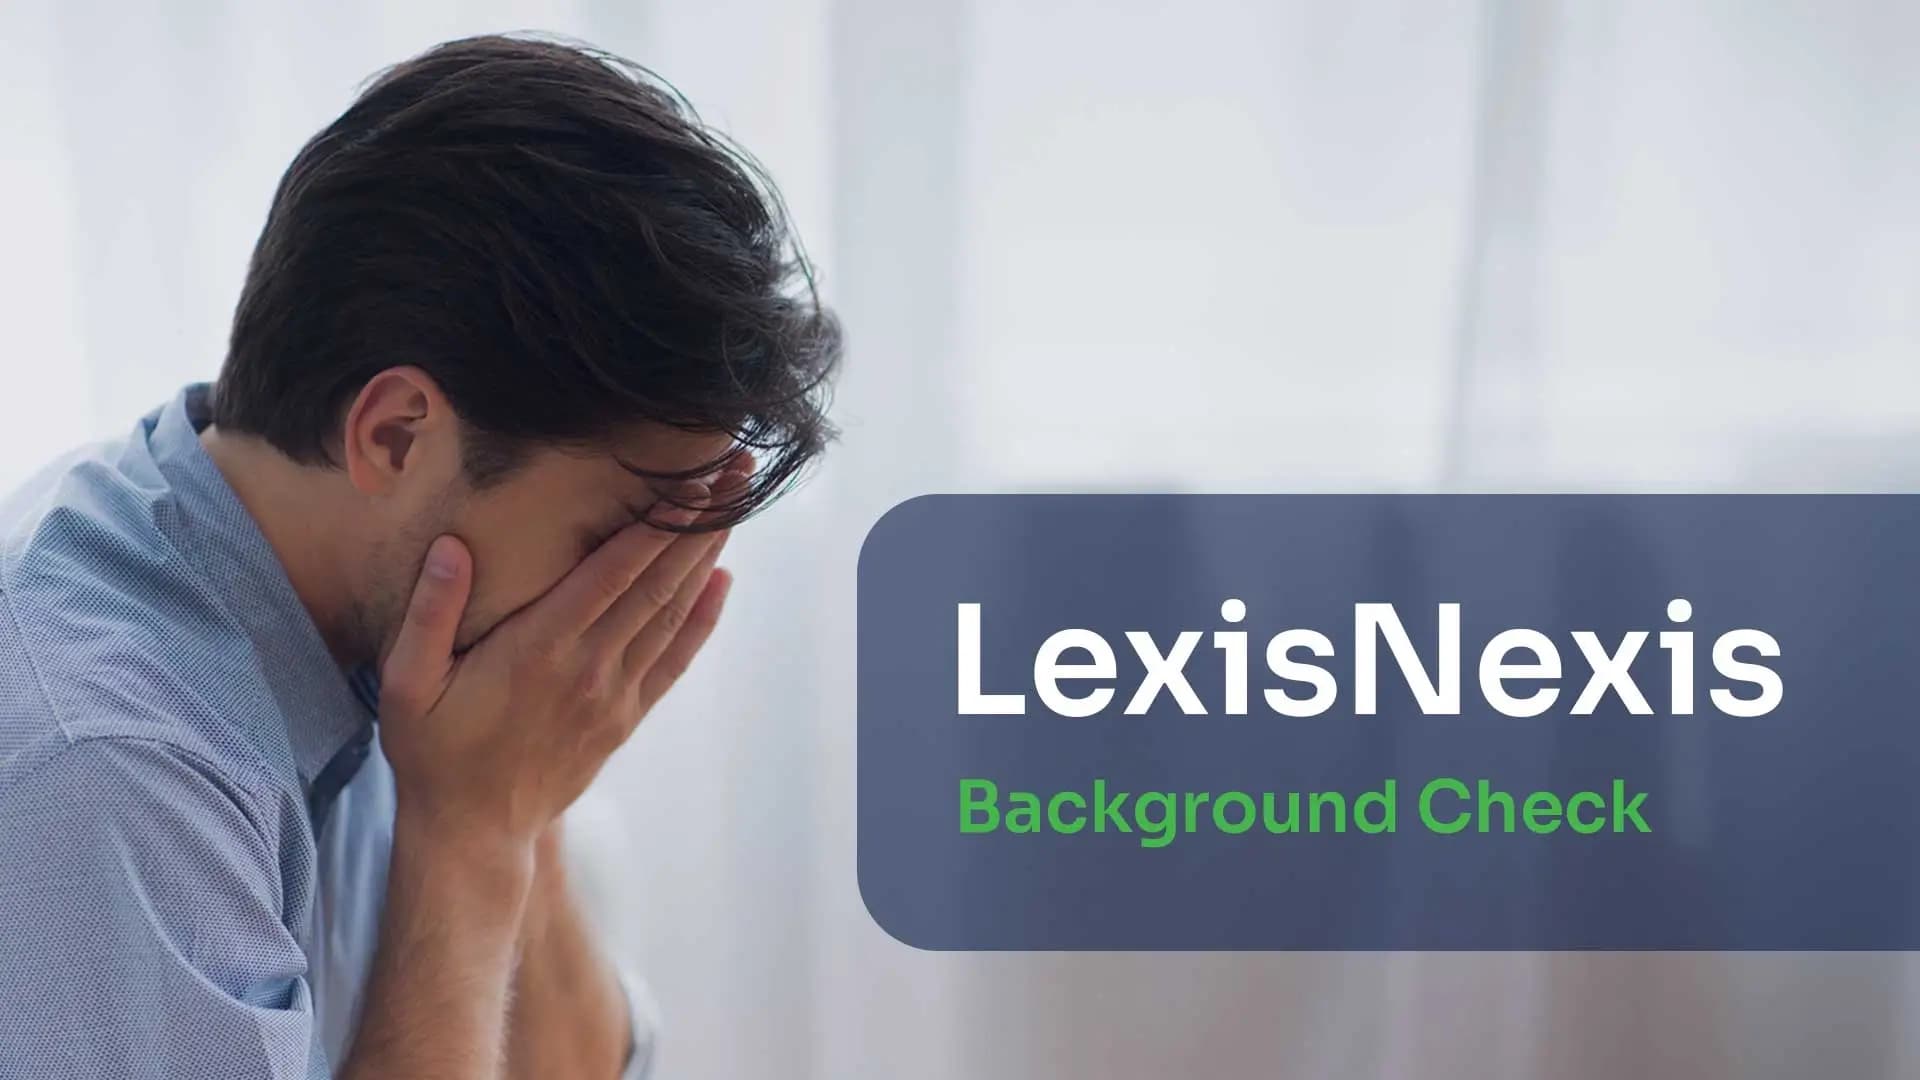 Man crying on lexisnexis background check report